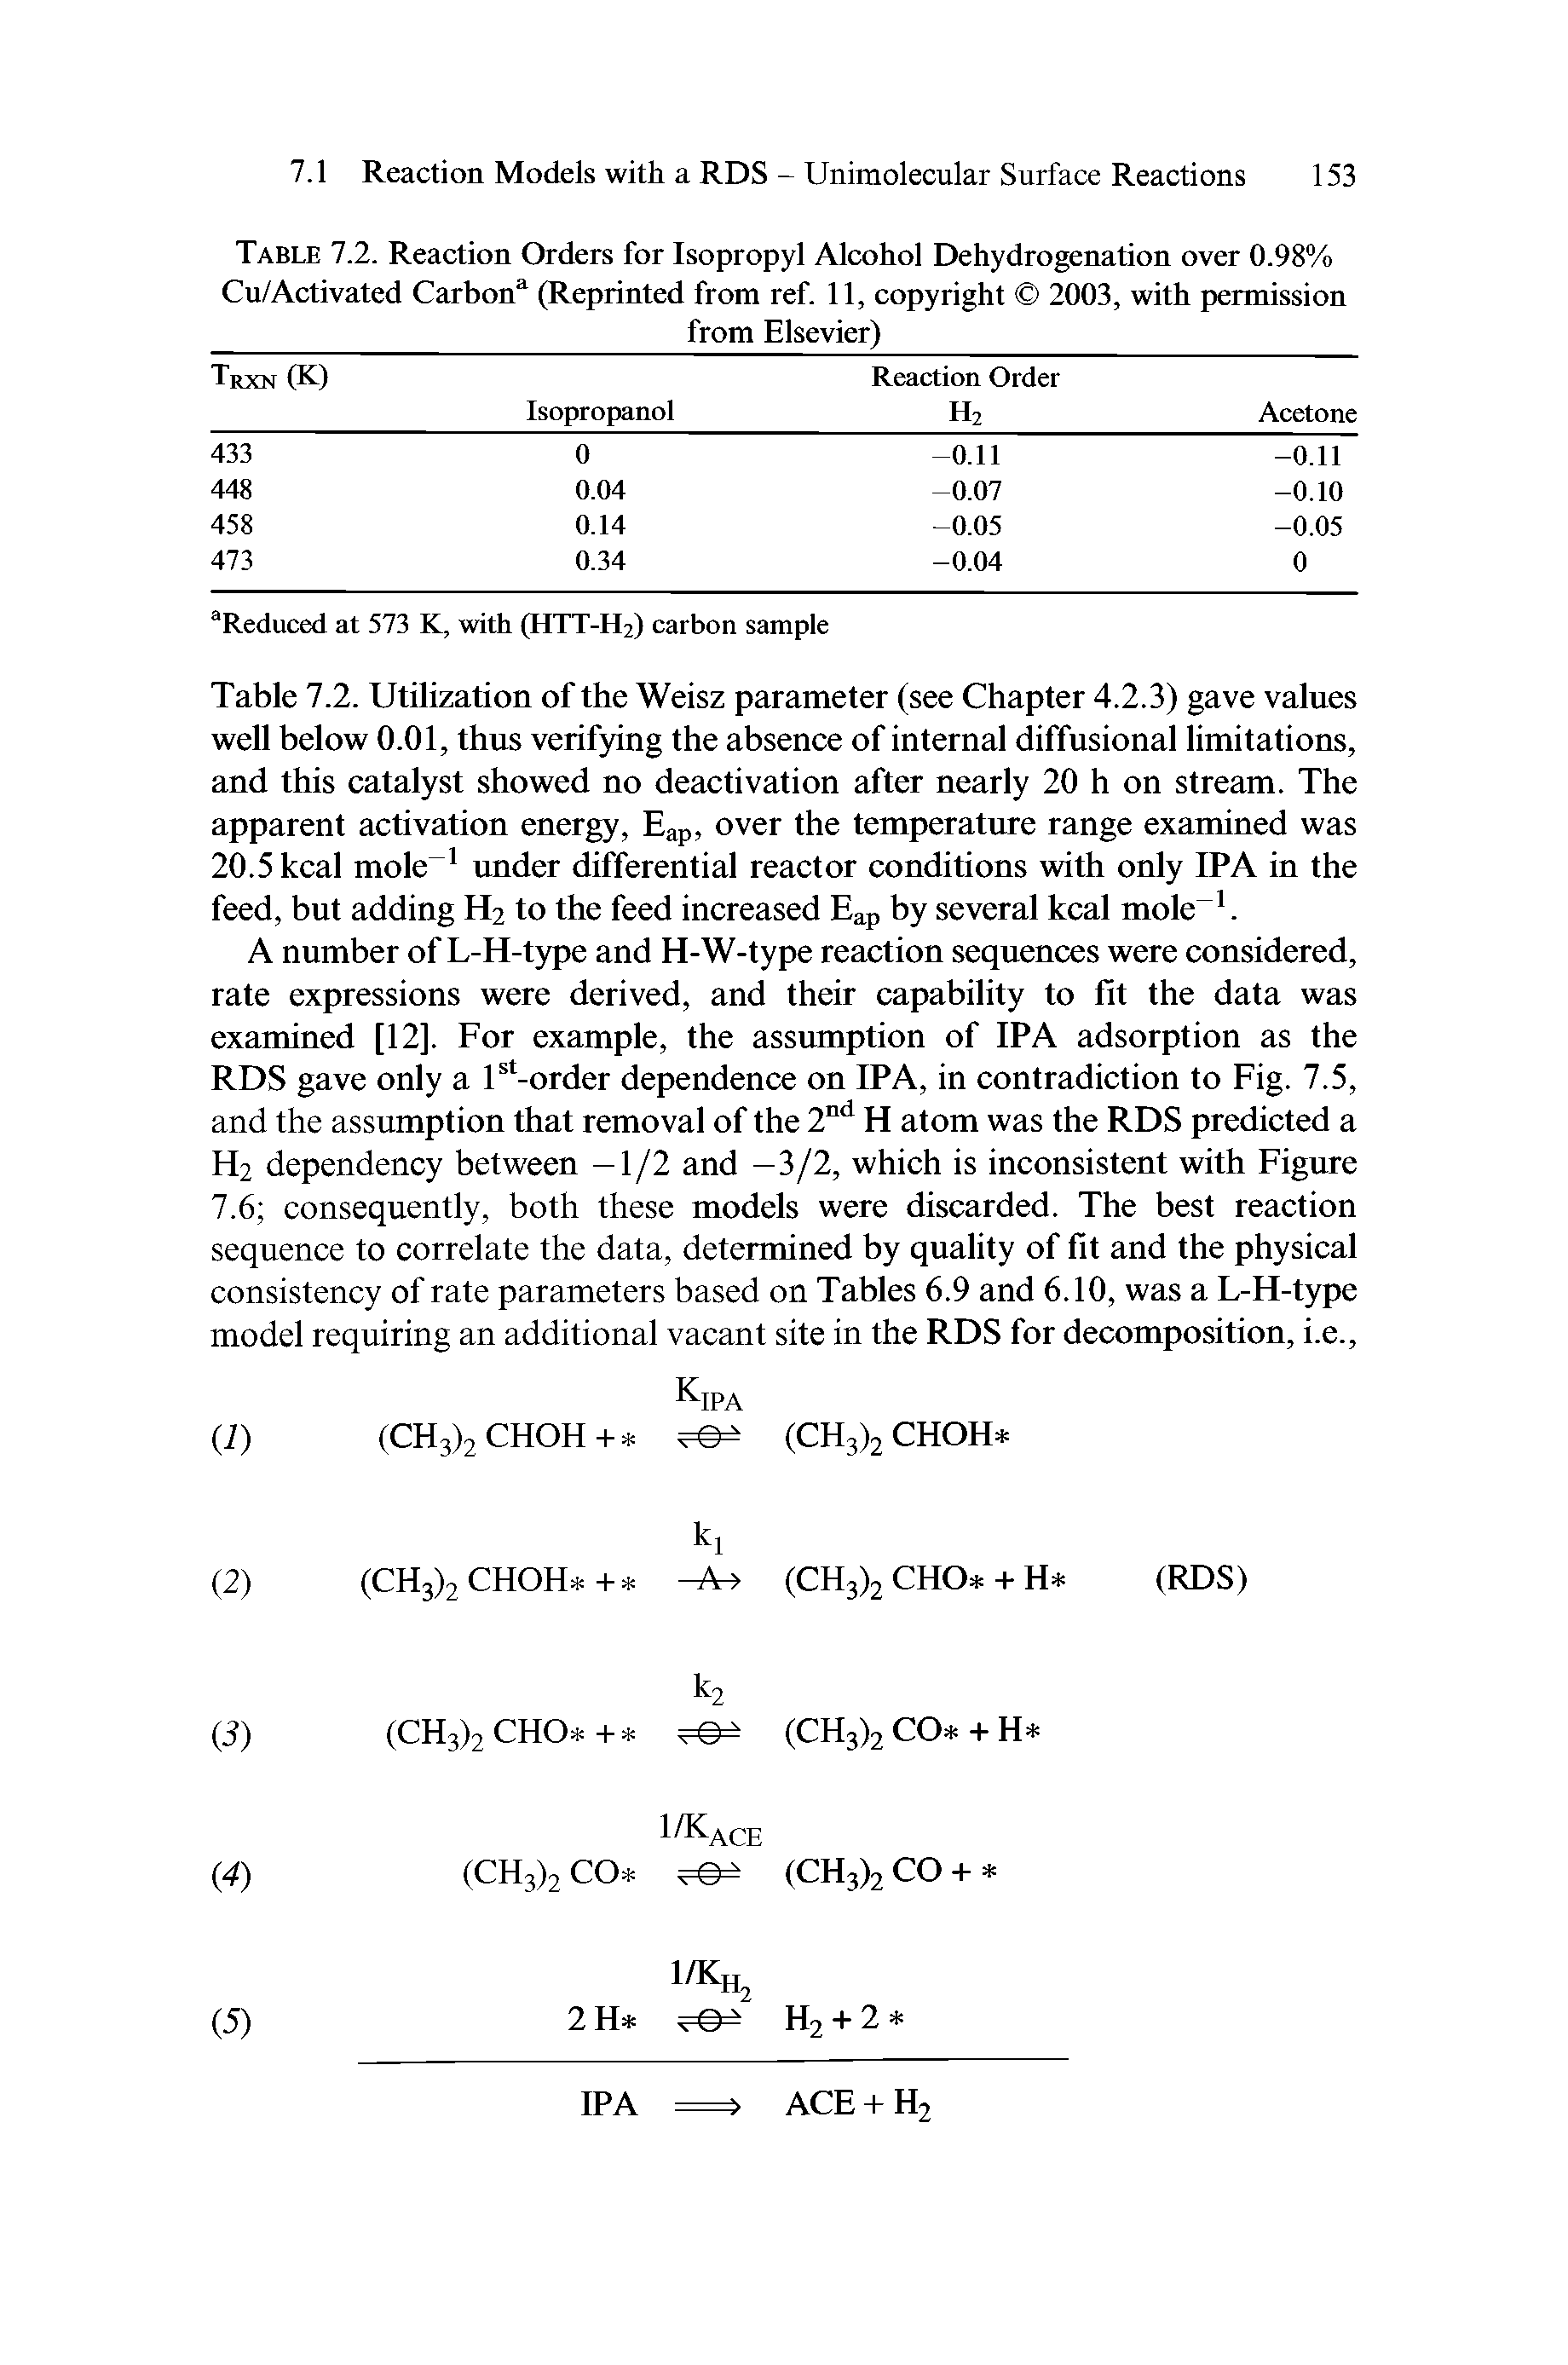 Table 7.2. Reaction Orders for Isopropyl Alcohol Dehydrogenation over 0.98% Cu/Activated Carbon (Reprinted from ref. 11, copyright 2003, with permission...